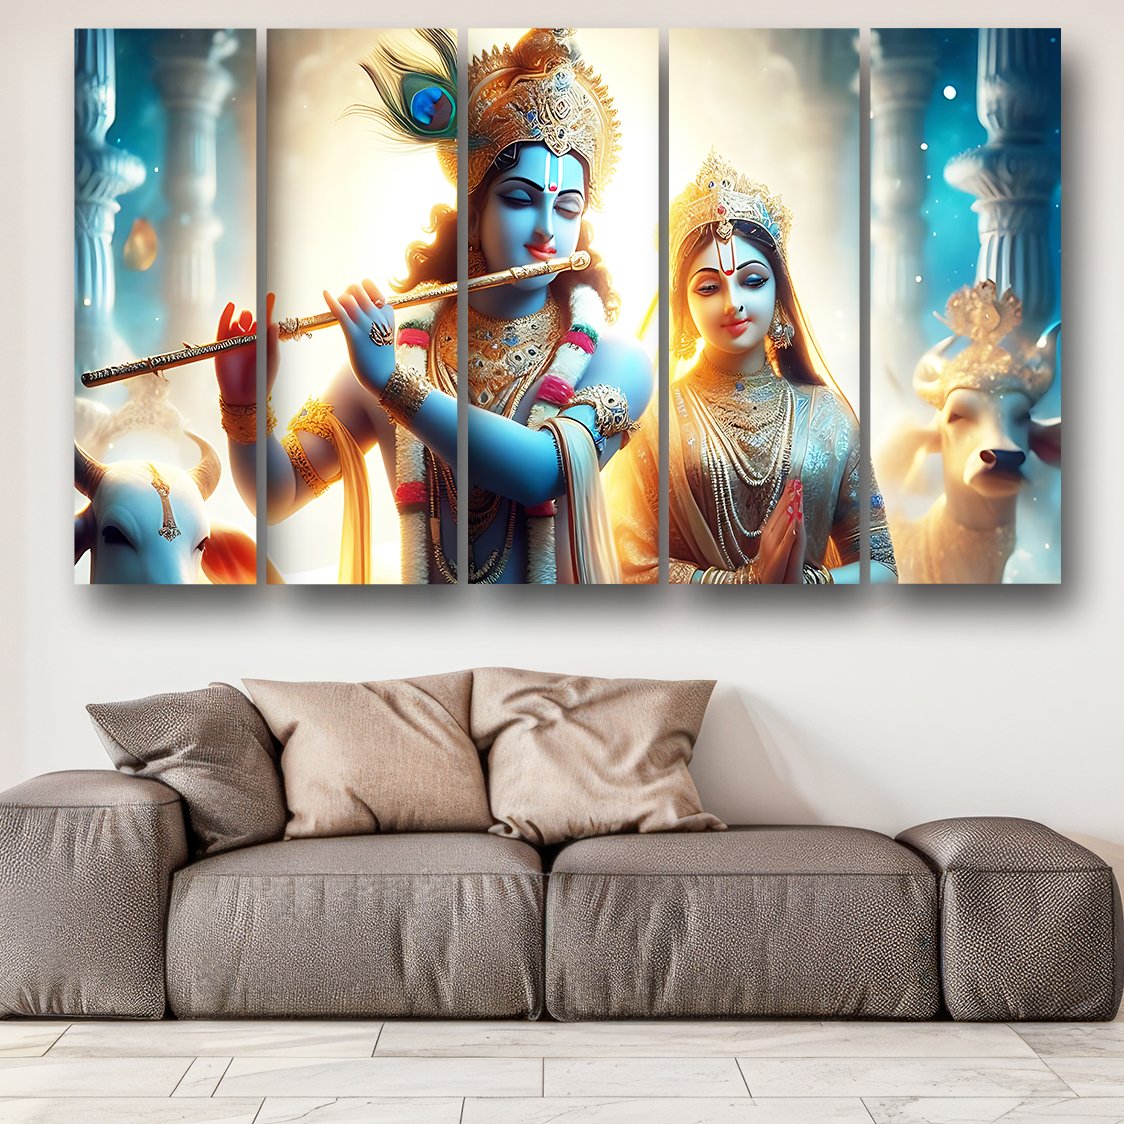 Casperme Lord Krishna Wall Painting For Living Room for Bedroom, Hotels & Office Decoration (48×30 inhes )